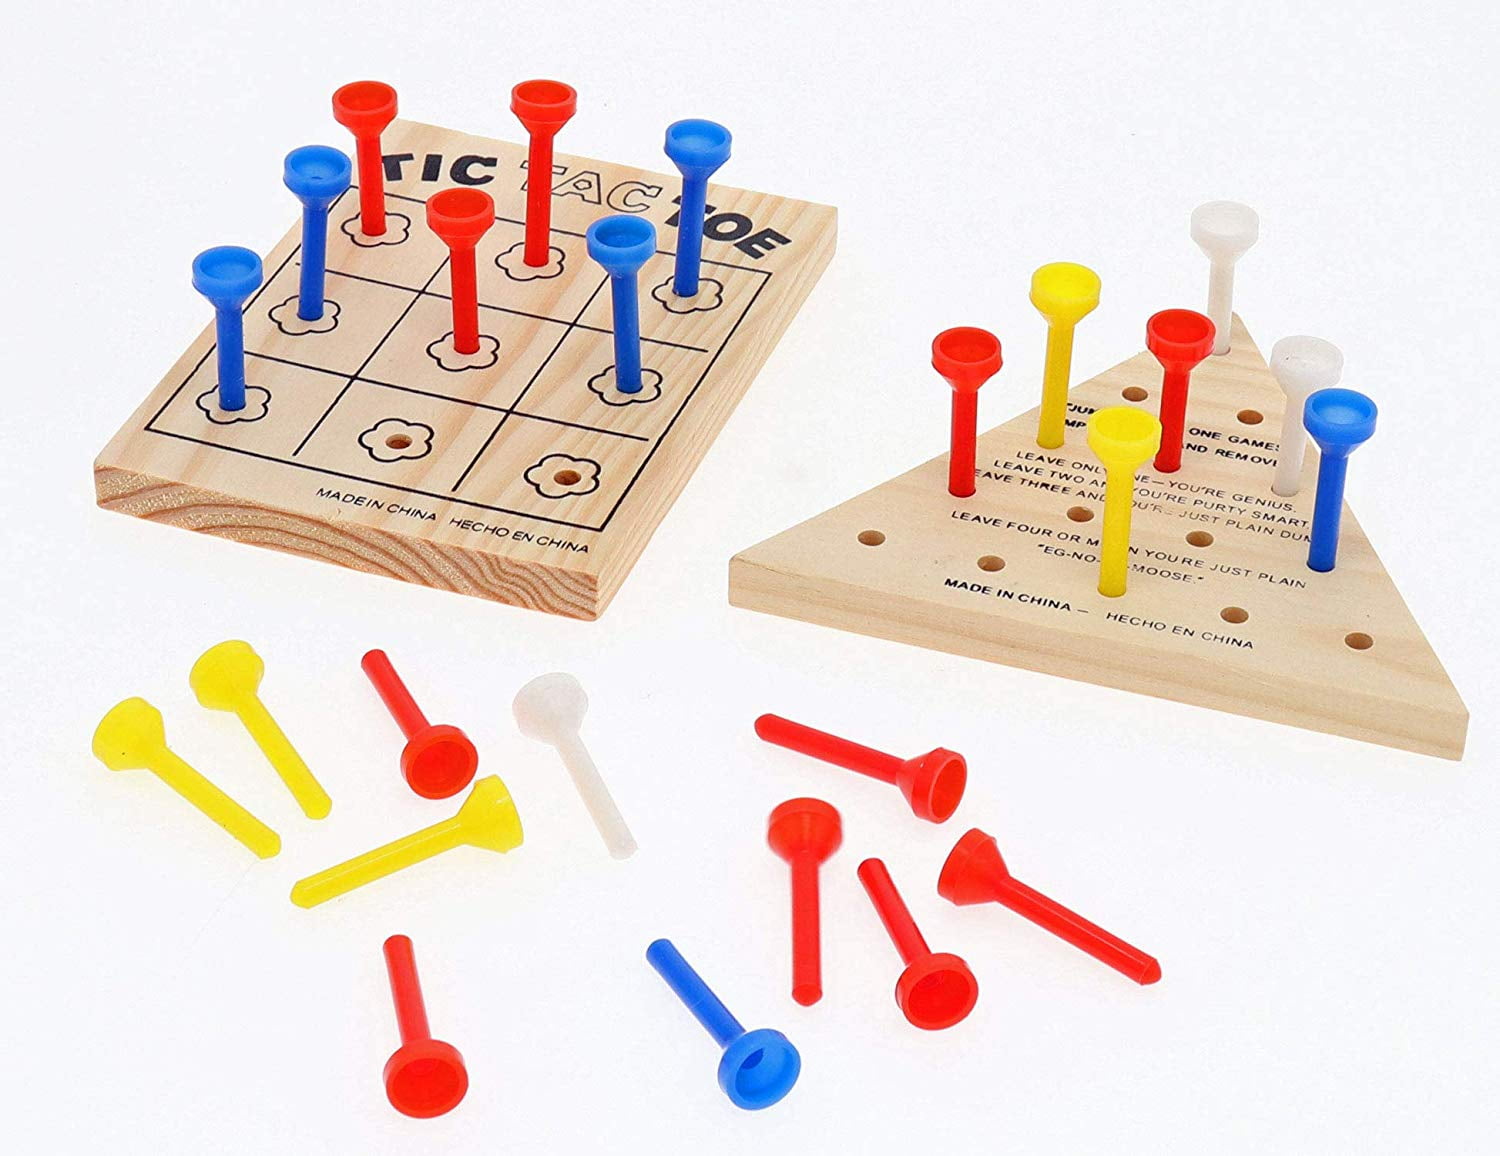 2 NEW WOODEN TRICKY TRIANGLE GAMES BRAIN TEASER PEG IQ CHALLENGE PARTY FAVORS 